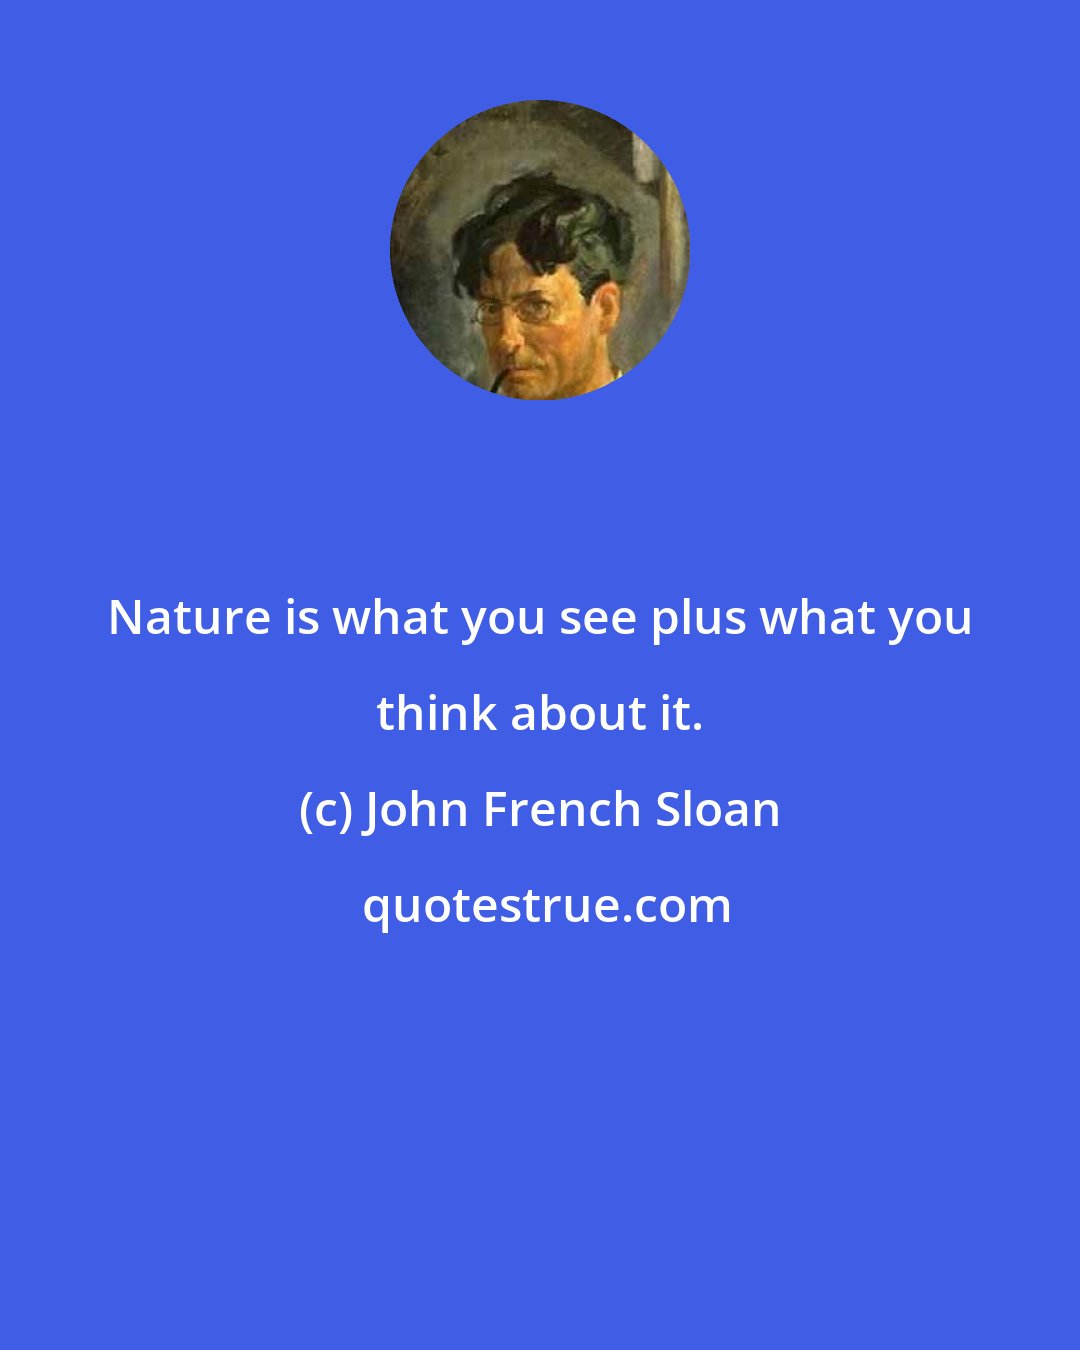 John French Sloan: Nature is what you see plus what you think about it.